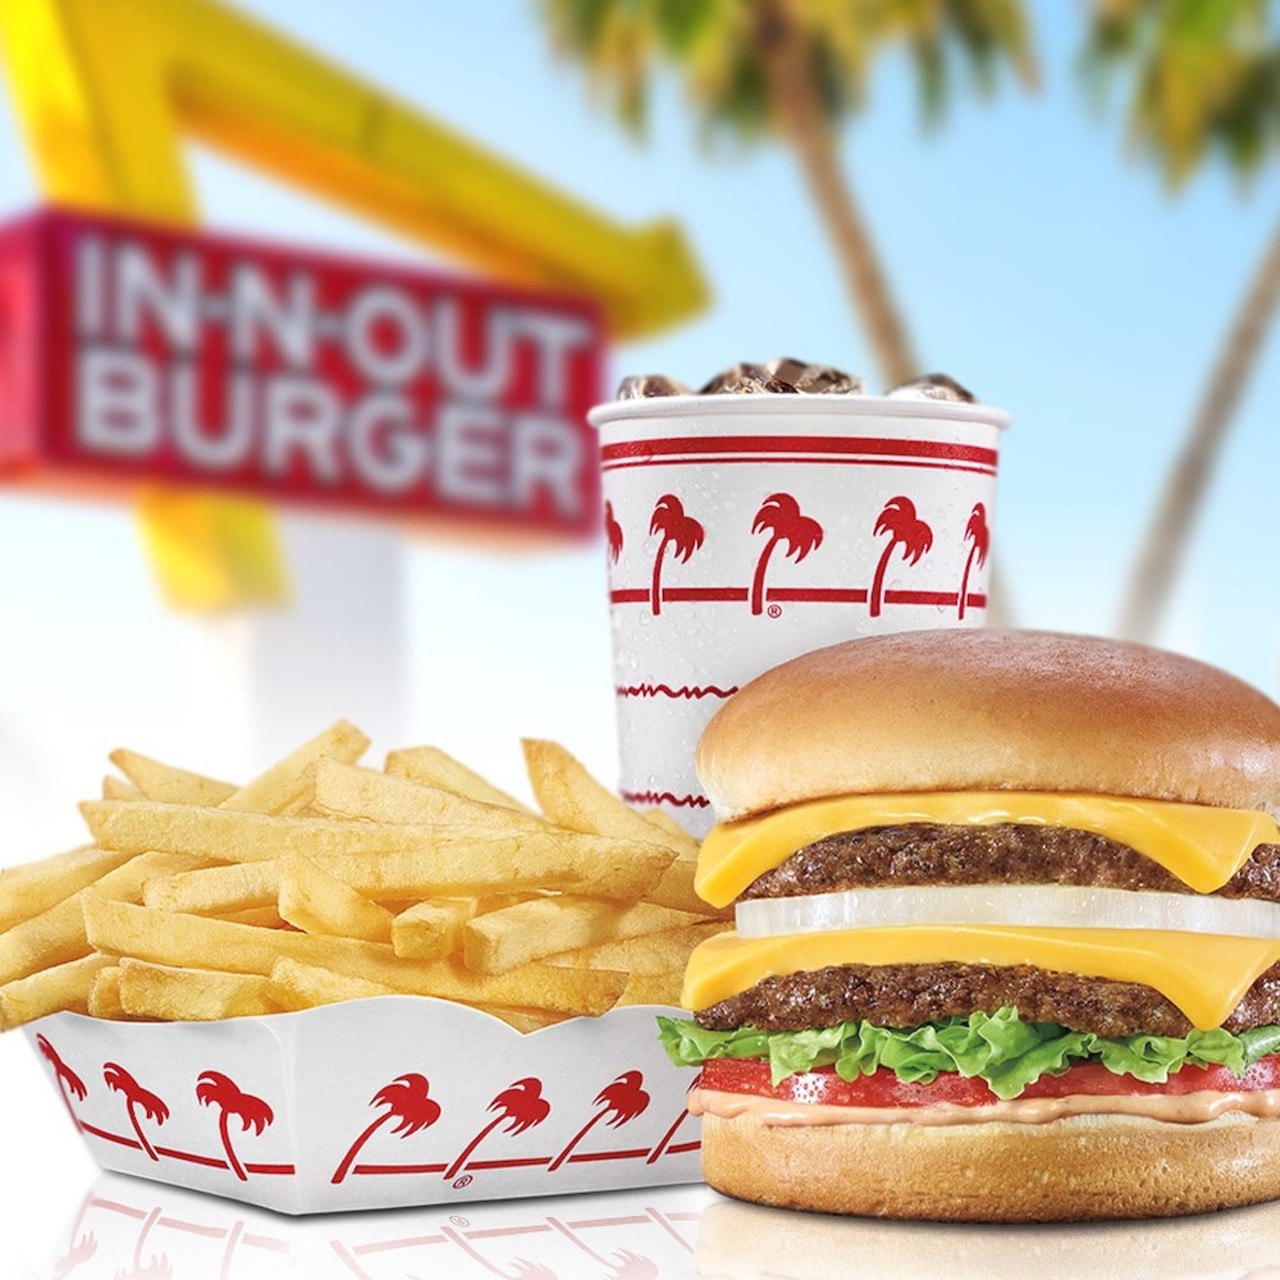 In-N-Out Burger
The first In-N-Out Burger opened in a tiny space in Baldwin Park, California in 1948. Since then, it’s grown to nearly 400 locations in the western United States. No place east of the Mississippi River has been graced by the famous burger: a toasted bun topped with an all-beef patty, onion, lettuce, tomato and In-N-Out’s special spread, which is made from ketchup, mayo and sweet pickle relish. The chain also has fries, which are fresh, hand-cut and prepared in sunflower oil, and shakes, which come in chocolate, strawberry and vanilla. You can also order a double, triple or quadruple burger or grilled cheese off the “Not So Secret Menu,” which says you can order your burger “Protein Style” (no bun) or “Animal Style” (a mustard-grilled beef patty, grilled onions, pickles and extra spread).